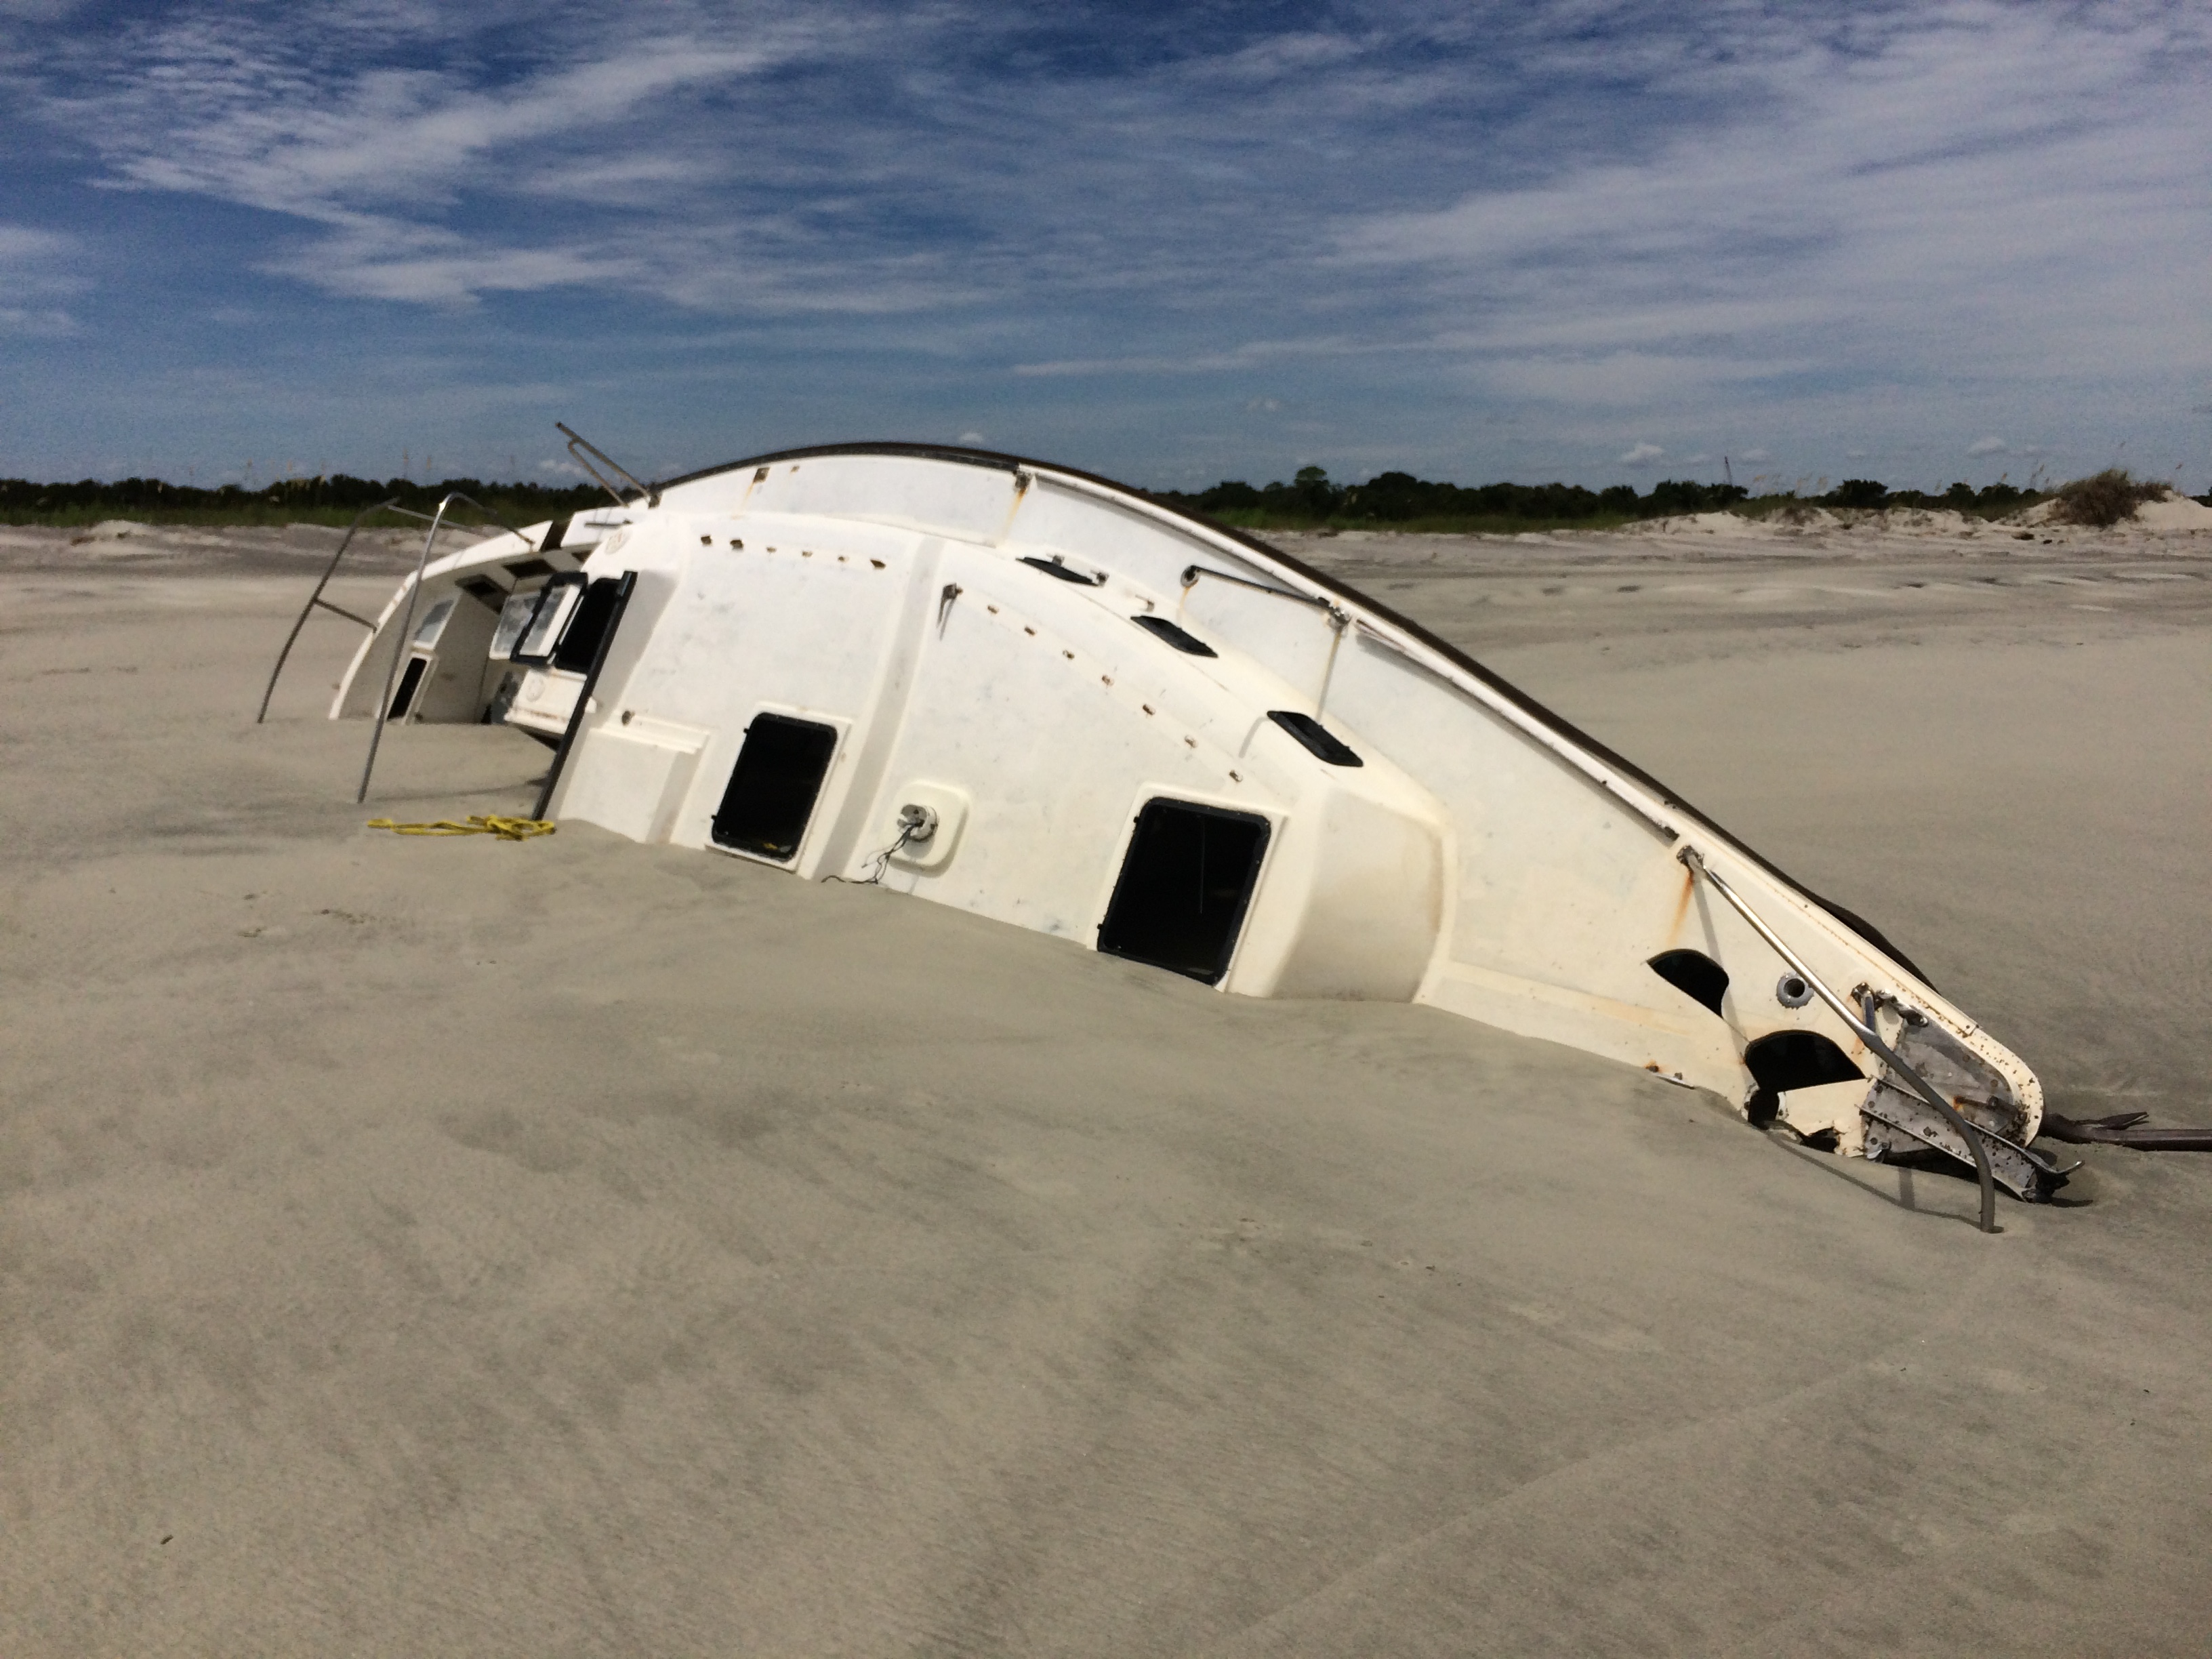 boat partially buried in sand on beach